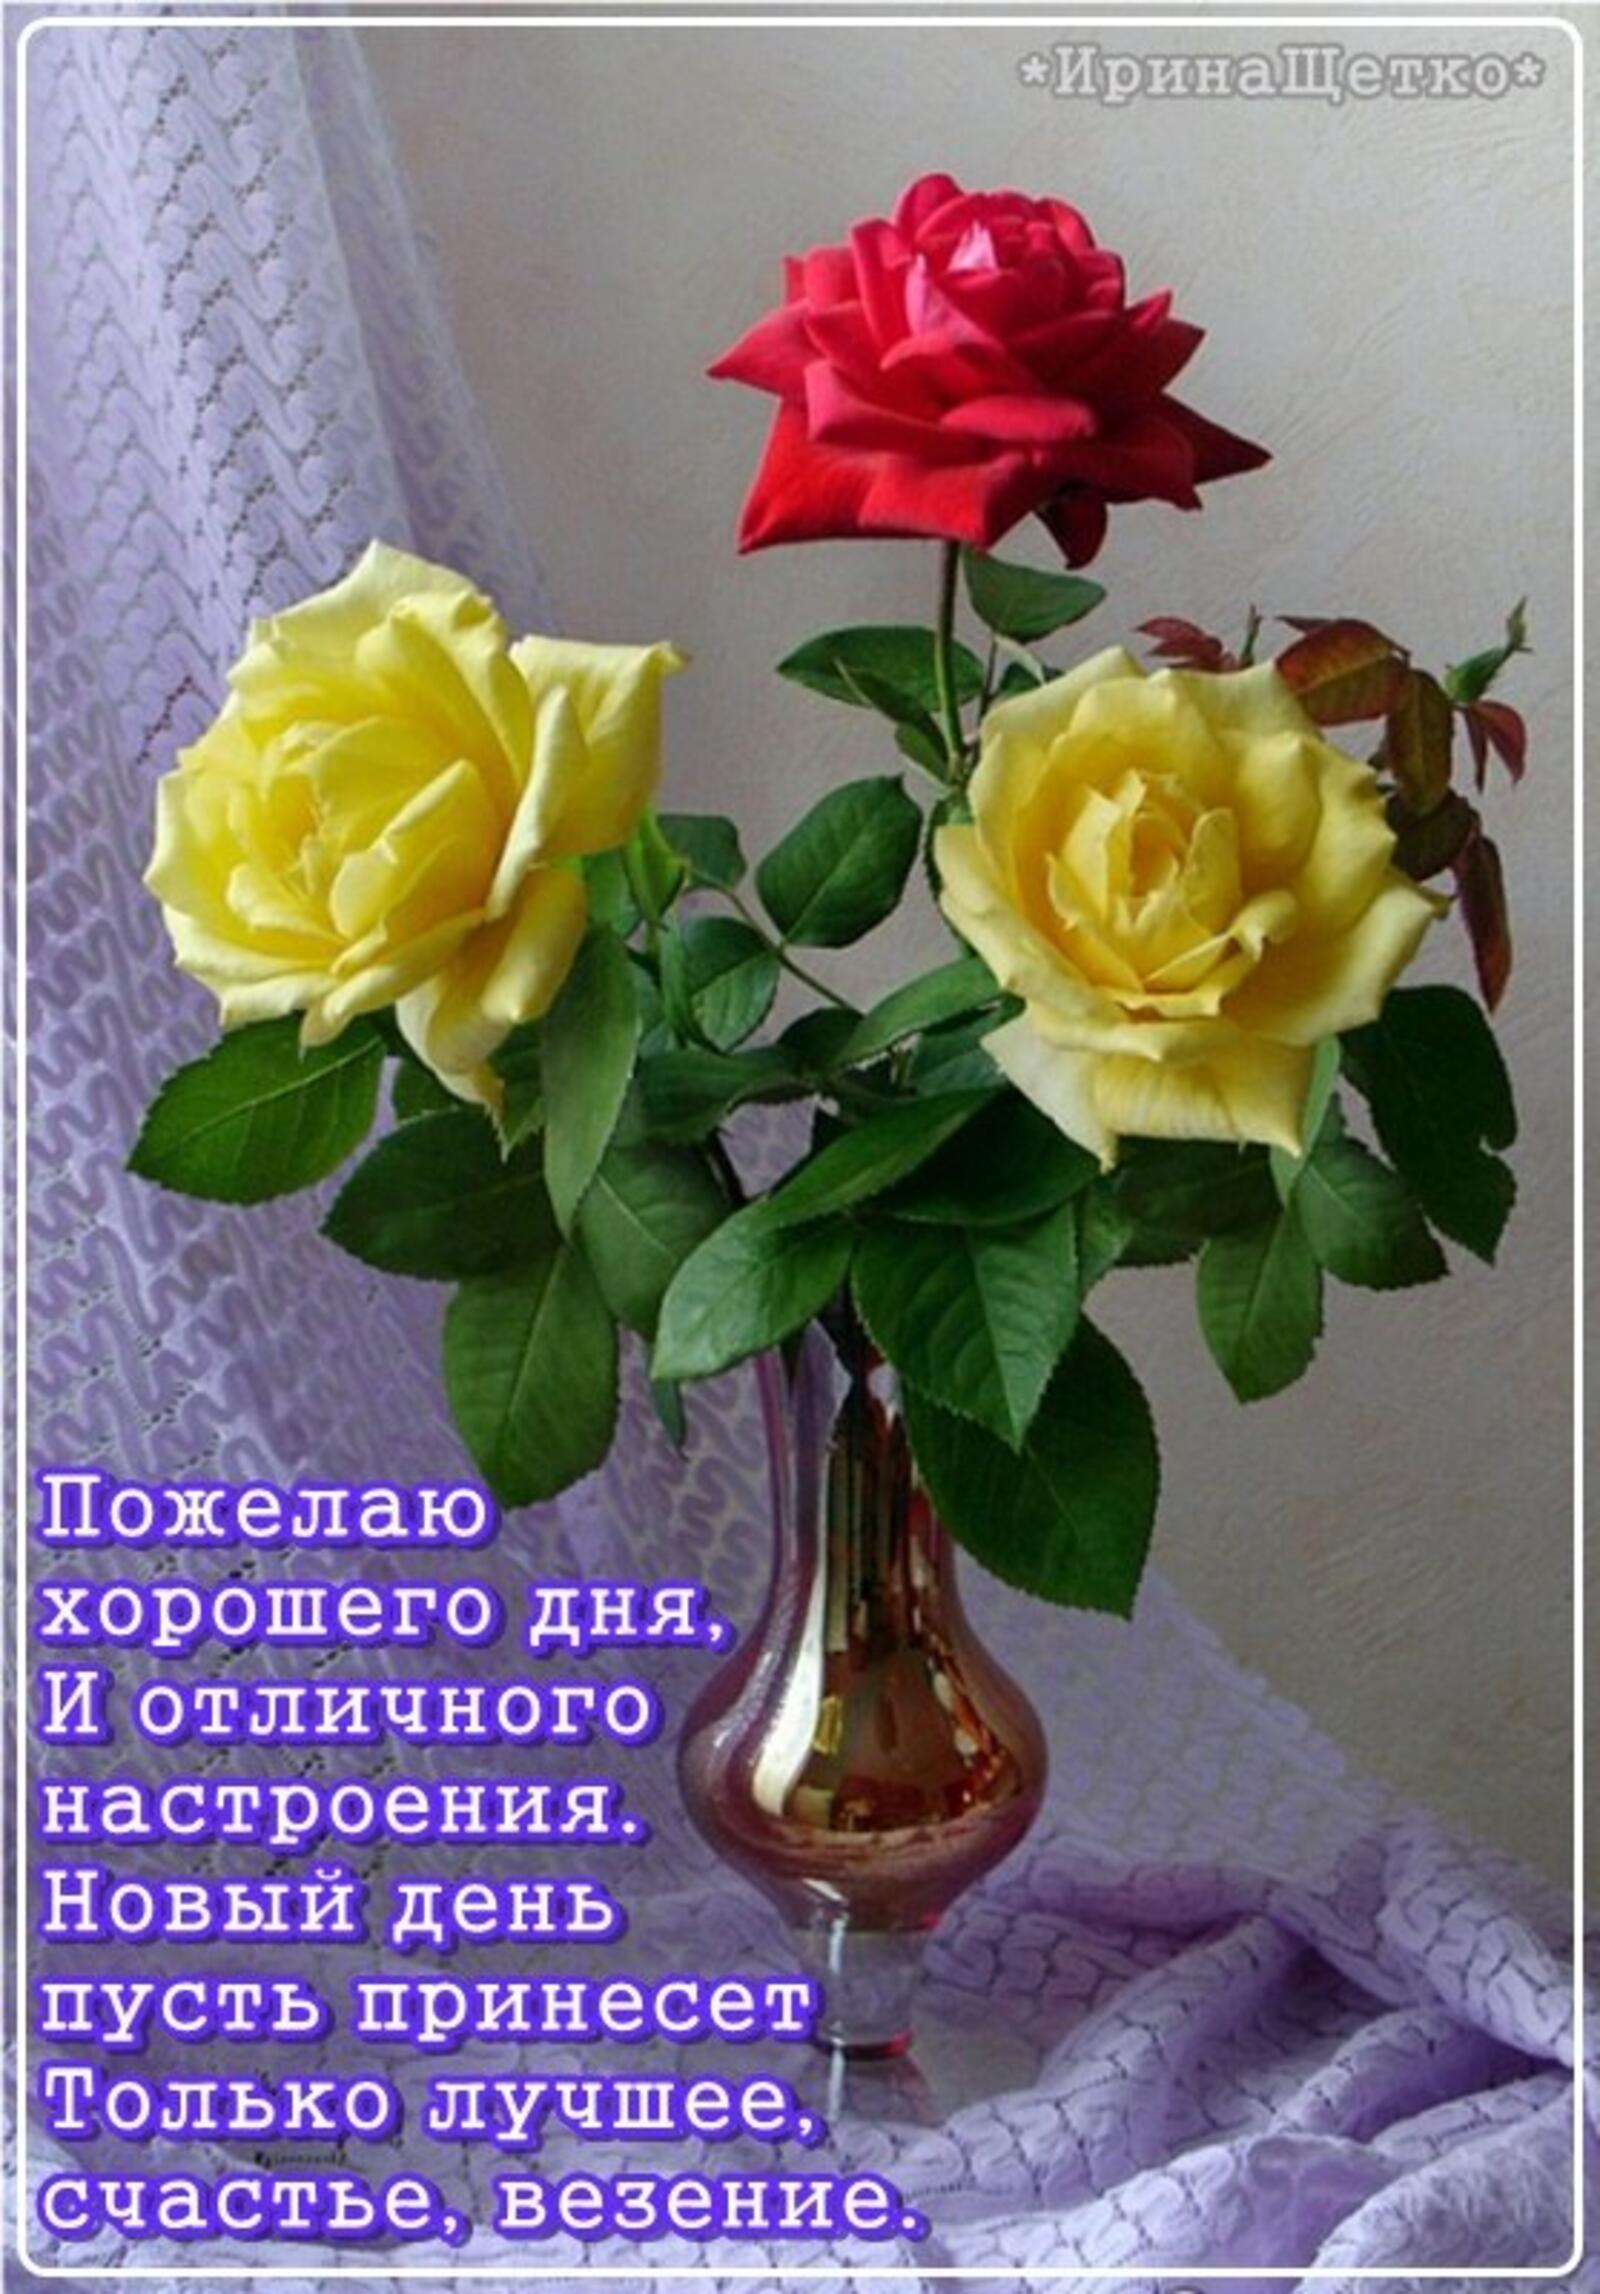 A postcard on the subject of have a great mood moods a bouquet of roses for free